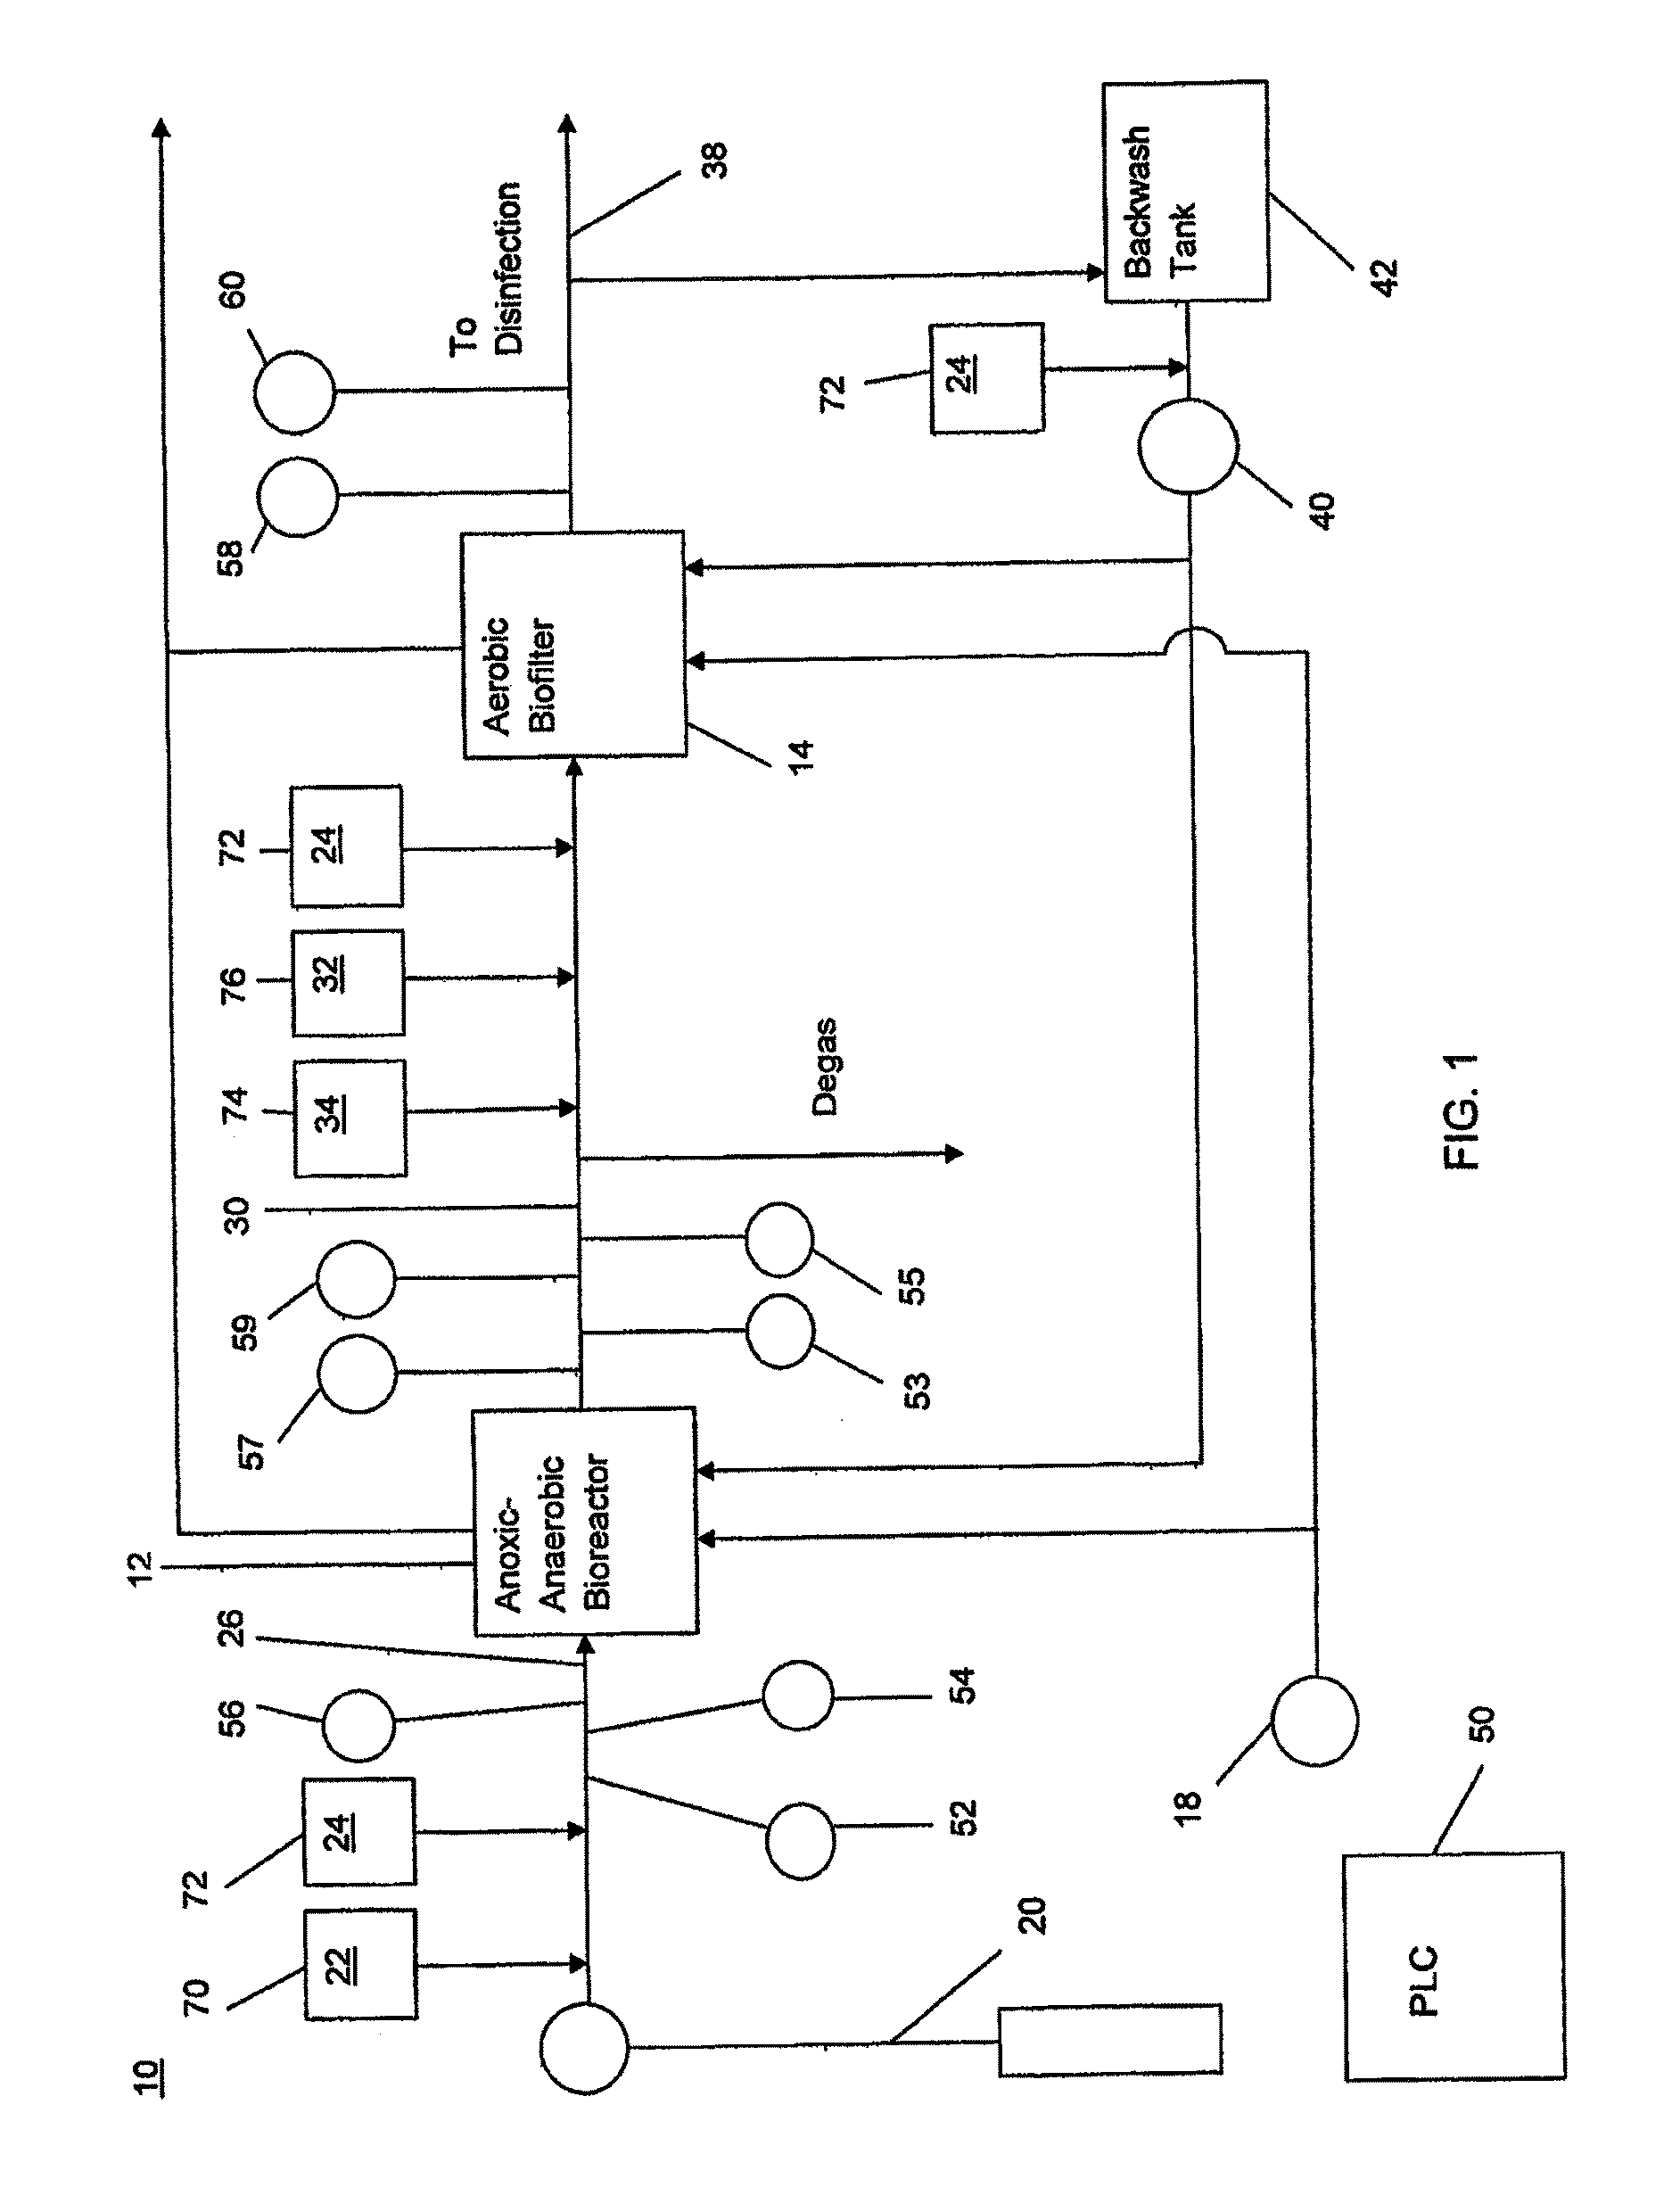 Biological two-stage contaminated water treatment system and process